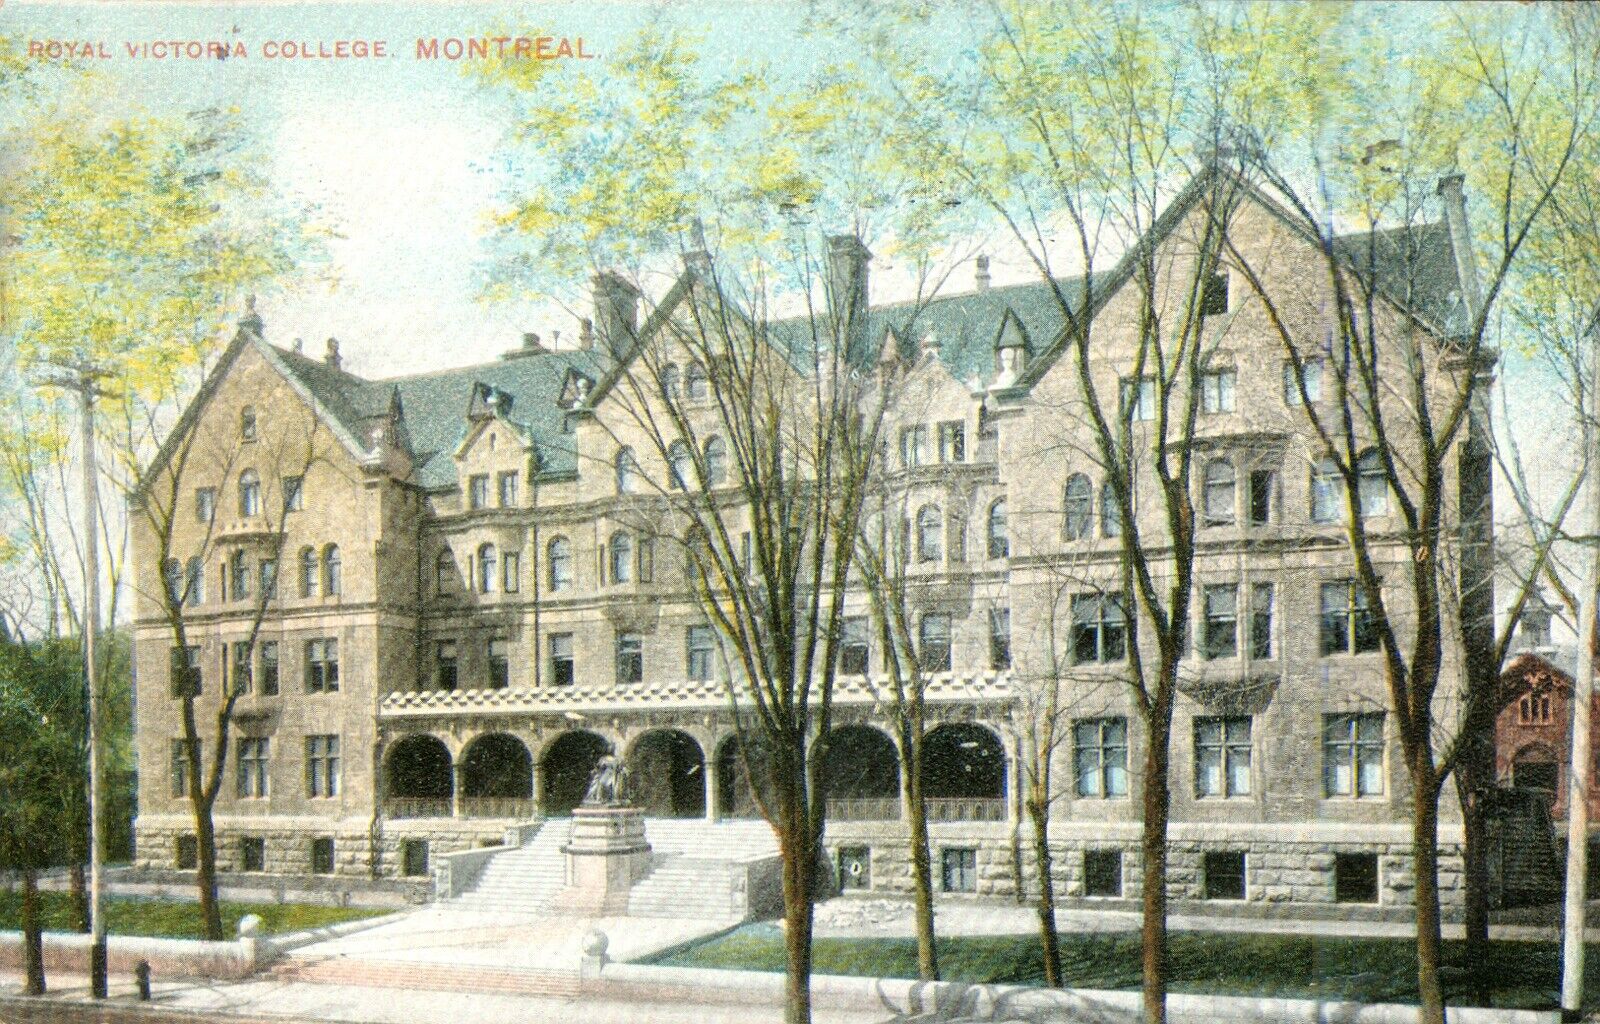 MONTREAL, Royal Victoria College, CANADA 1907 Antique POSTCARD Stamped